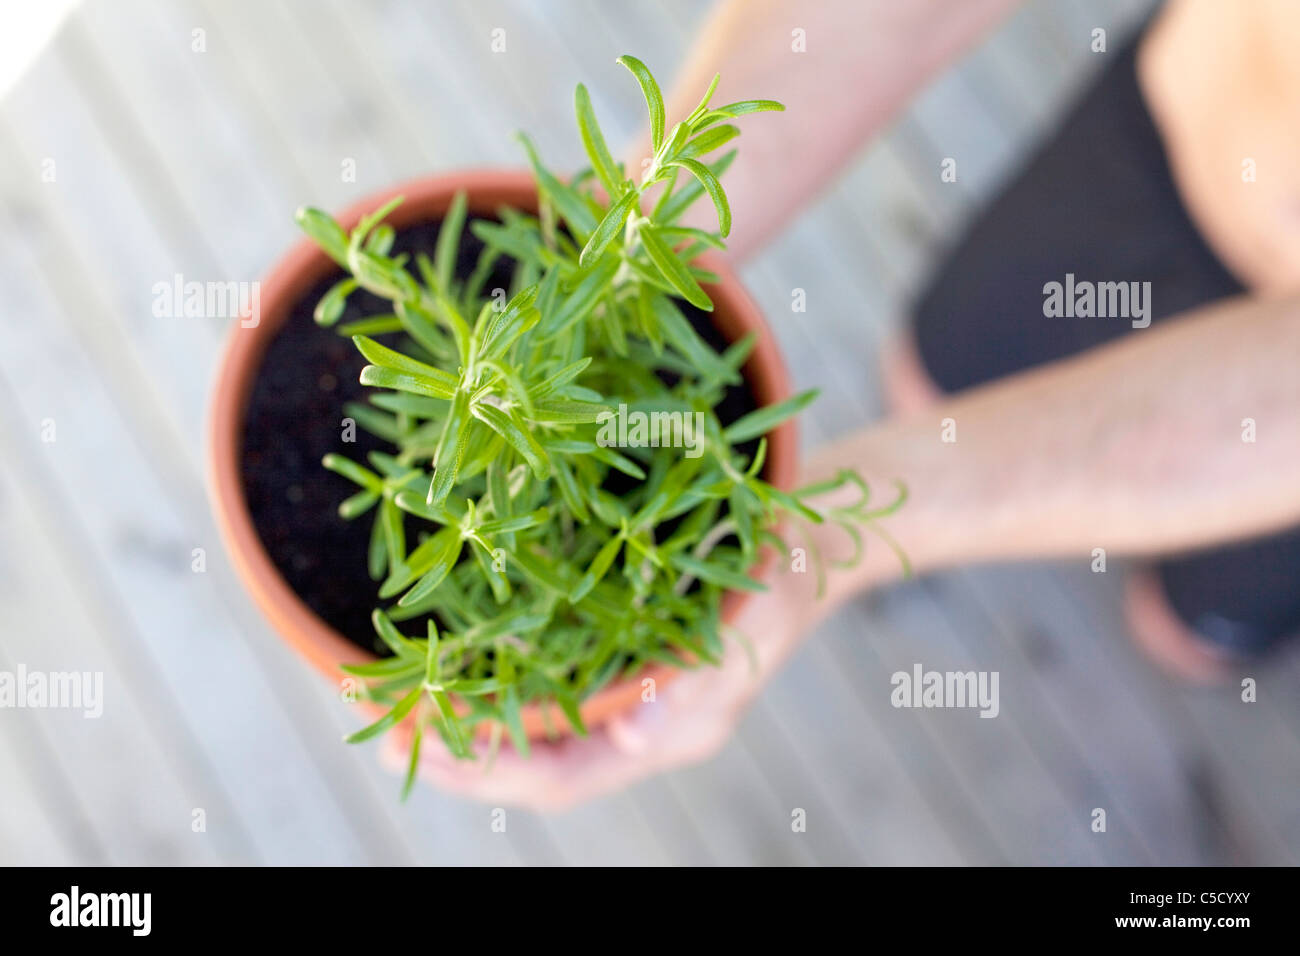 Close-up top view of hands holding a potted plant Stock Photo